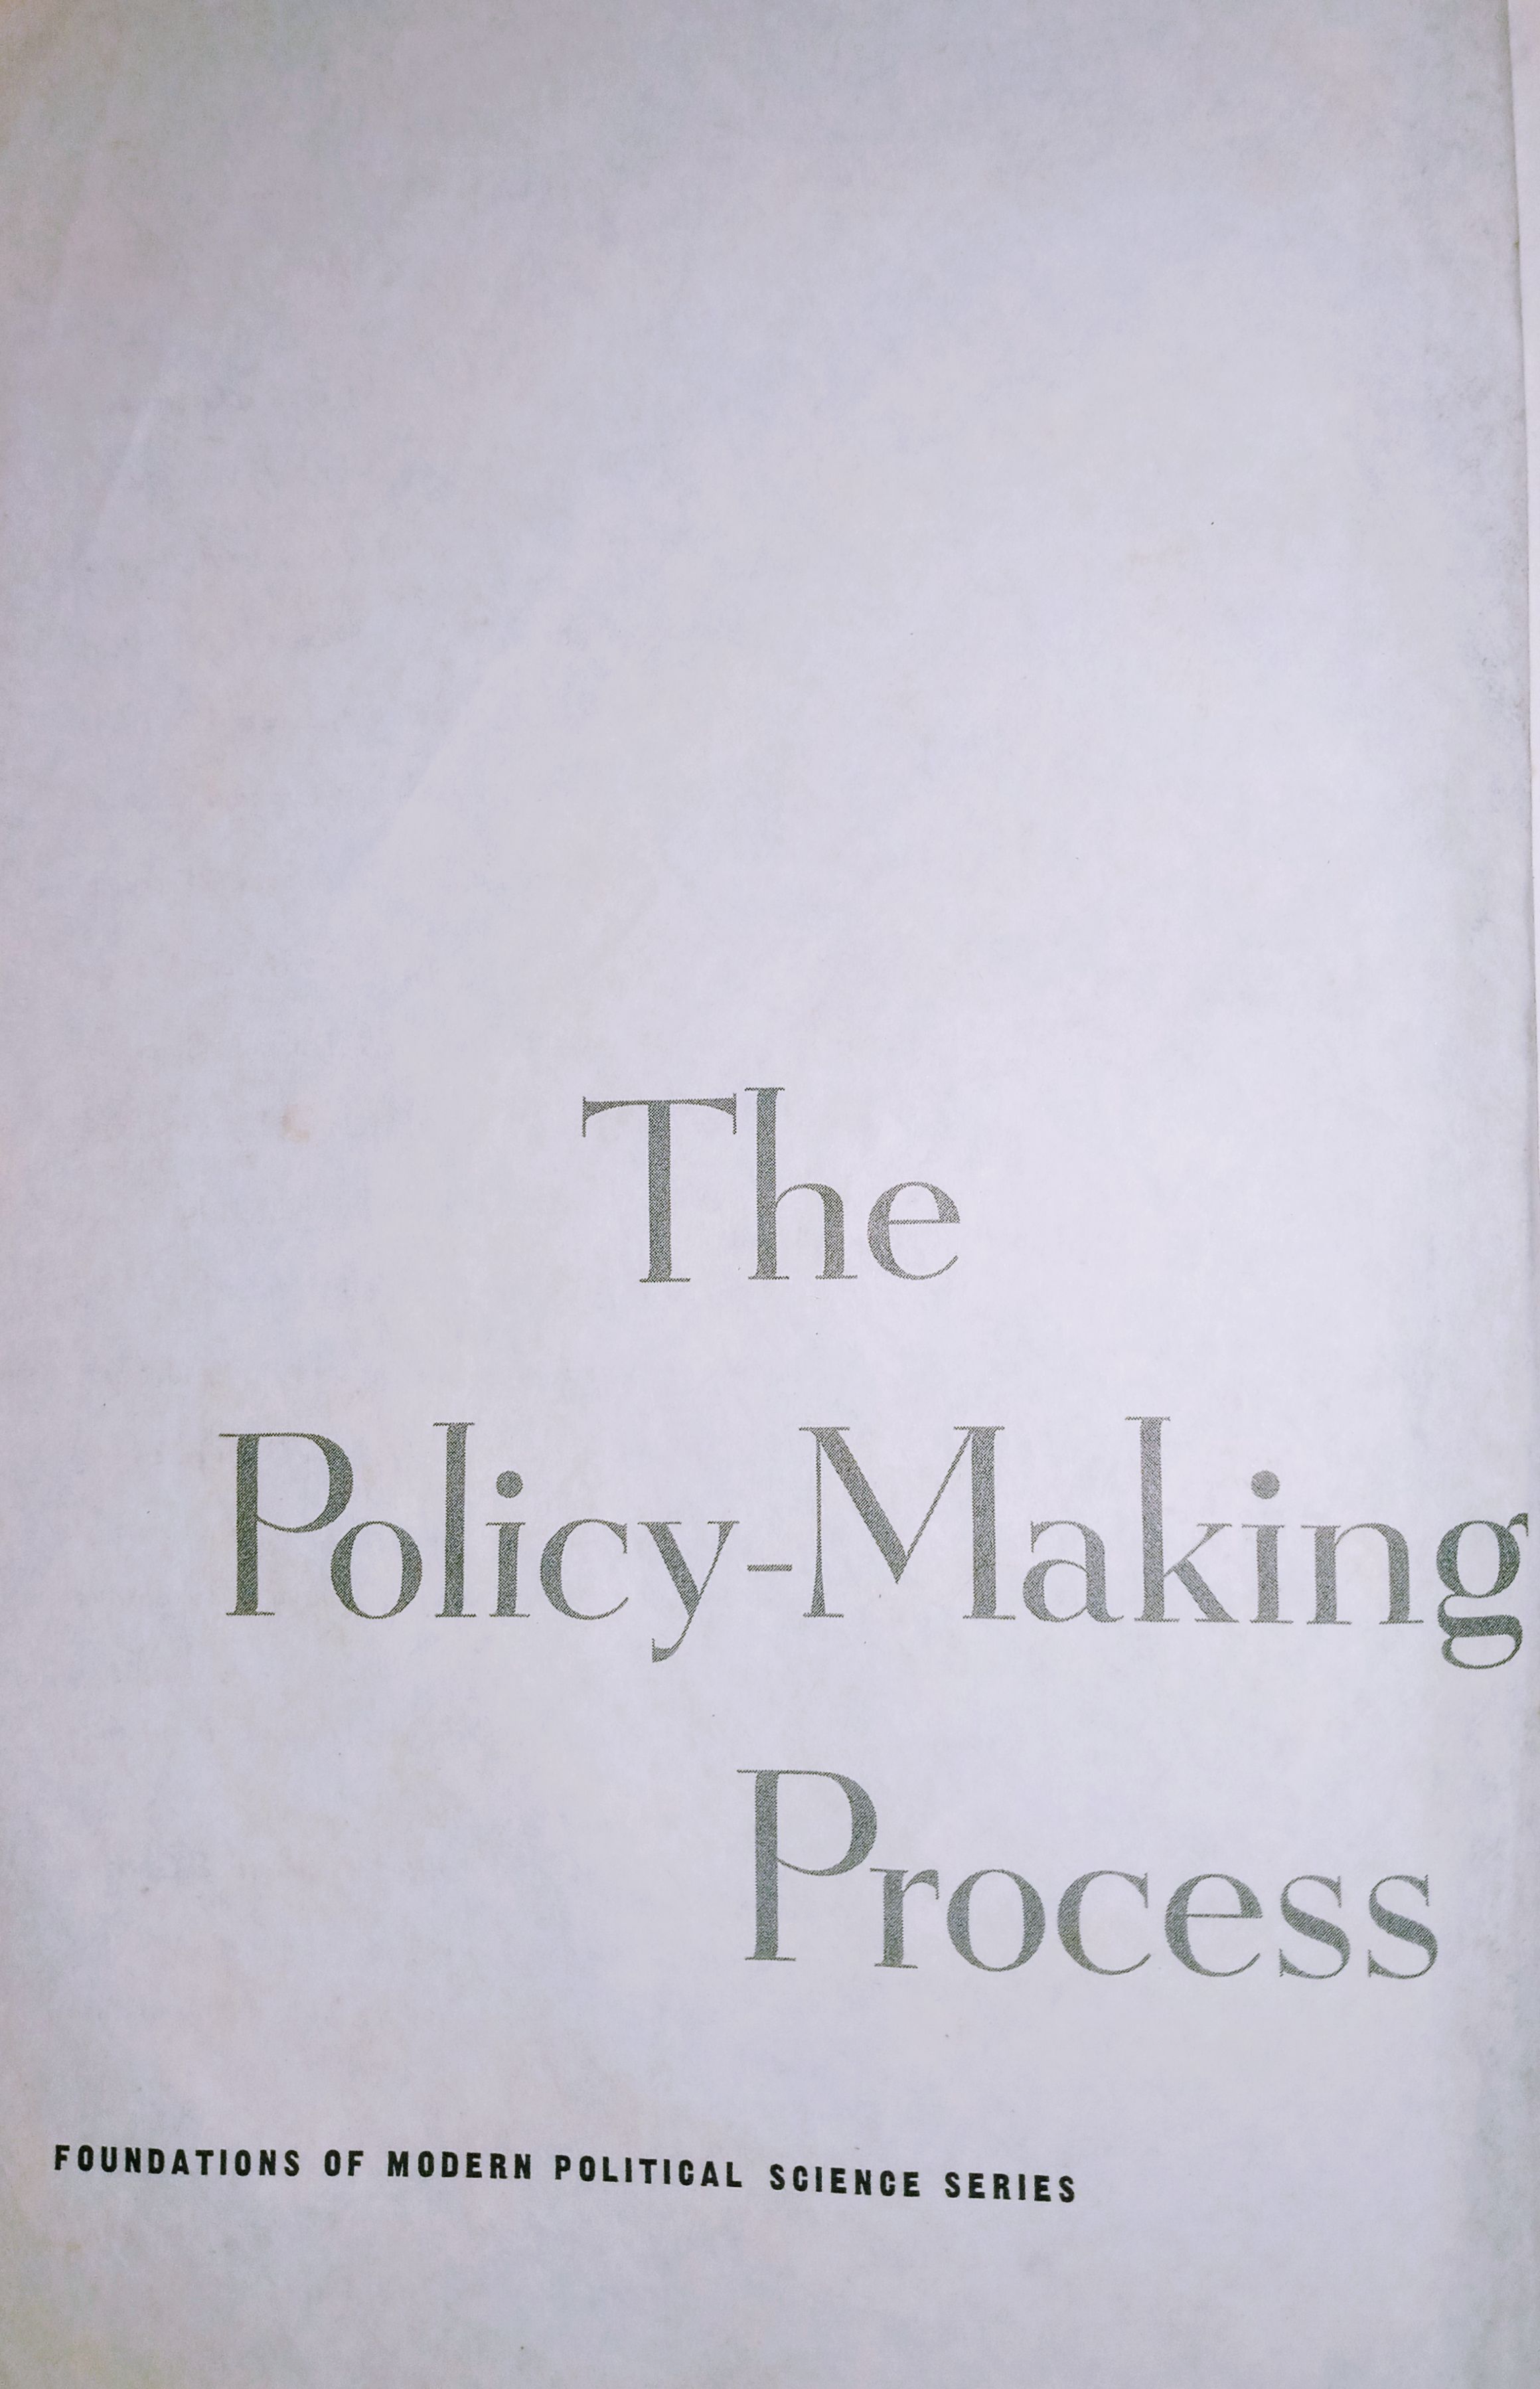 The policy making process.